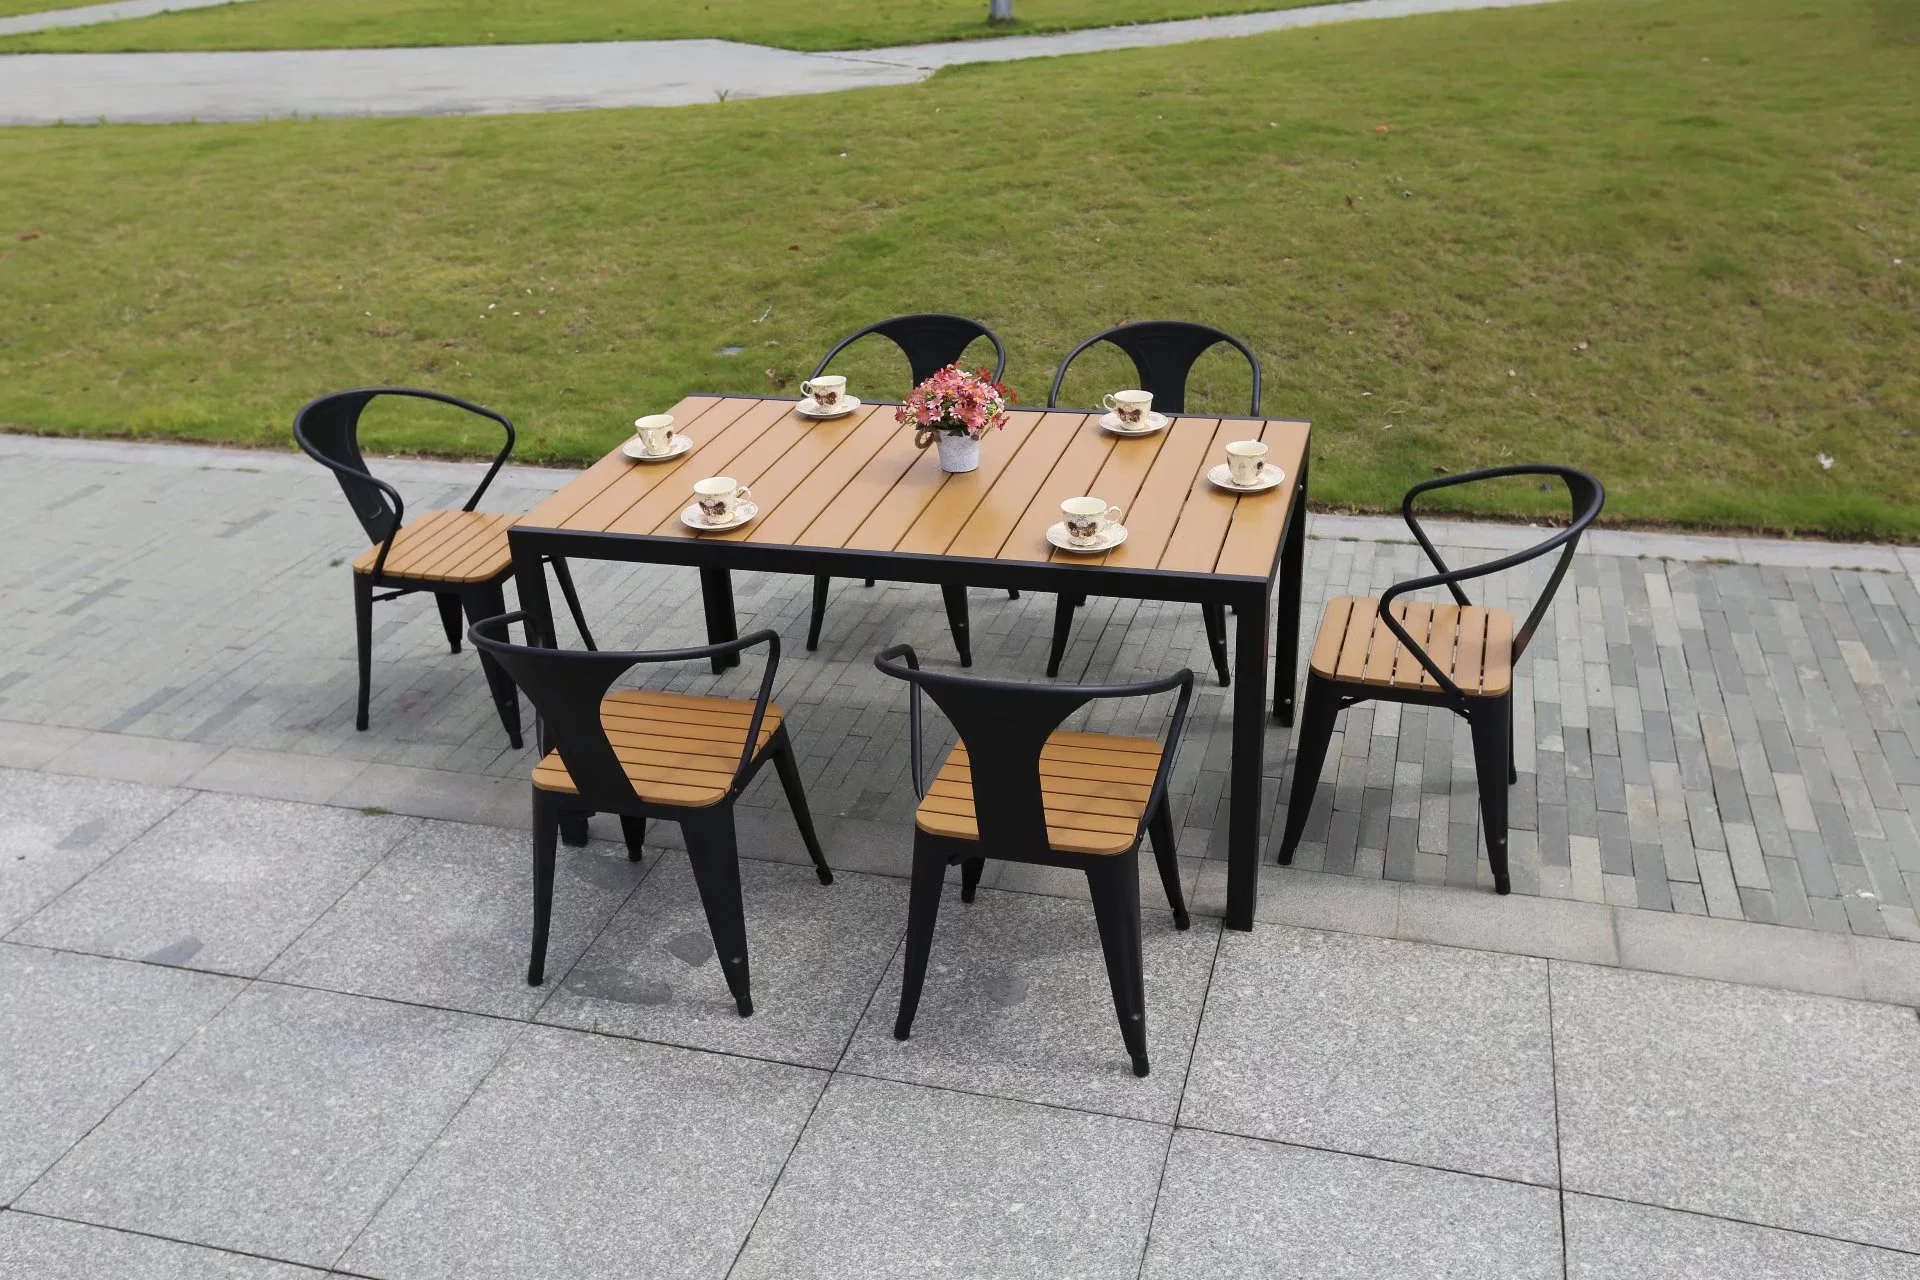 Waterproof Outdoor Leisure Furniture and Outdoor Balcony Garden Outdoor Furniture of Combination of Plastic Wood Table and Chair